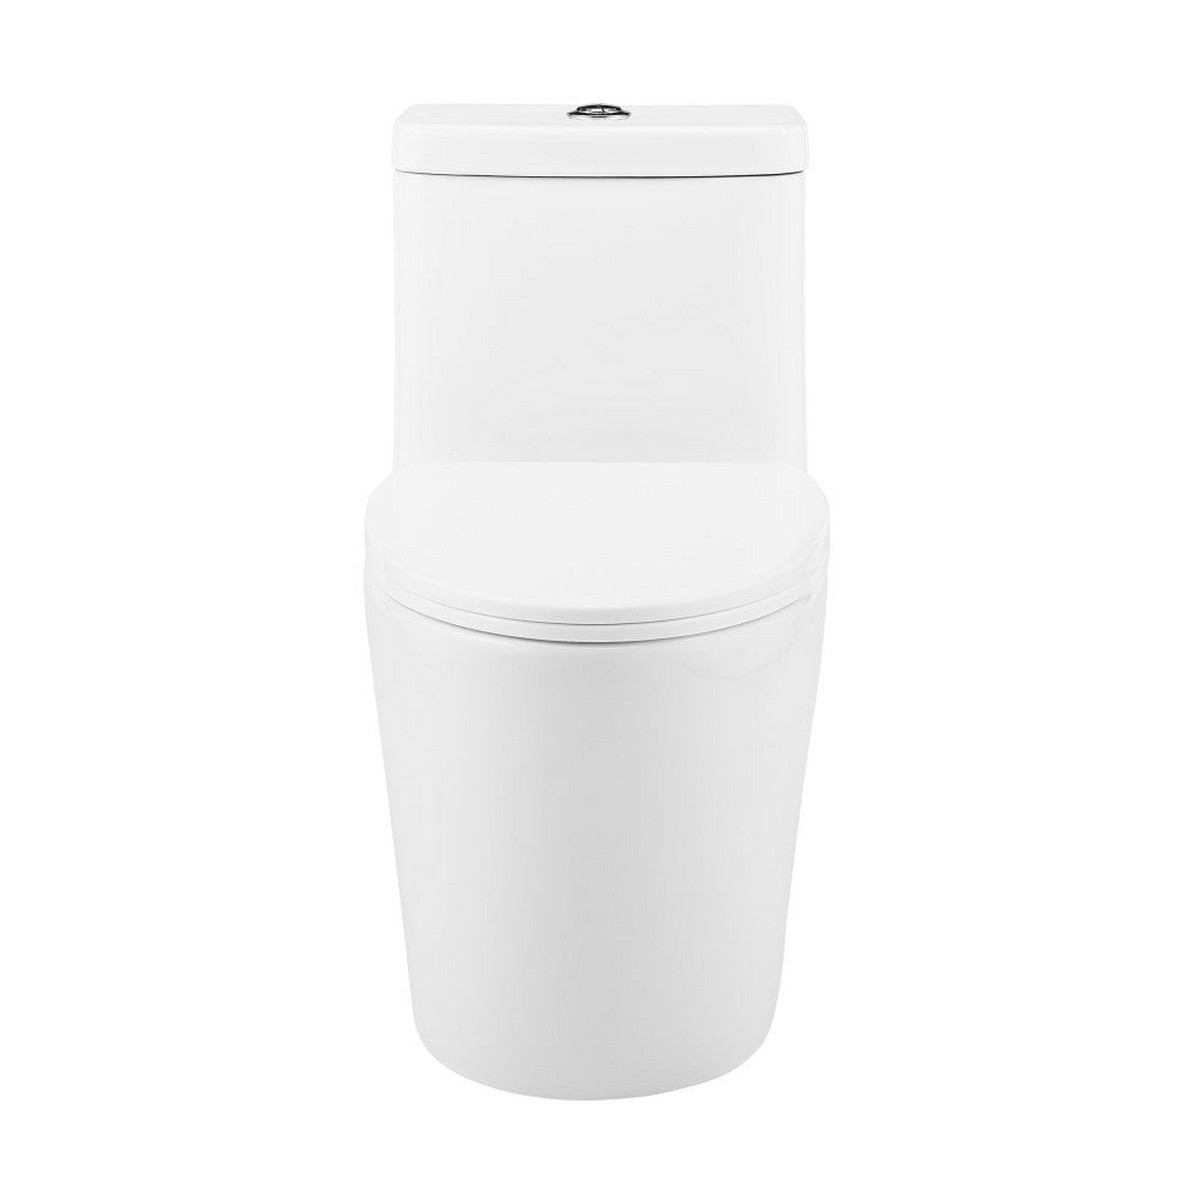 SWISS MADISON CT-1T104 FULTON 1.1/1.6 GPF DUAL FLUSH ONE-PIECE ELONGATED TOILET IN GLOSSY WHITE